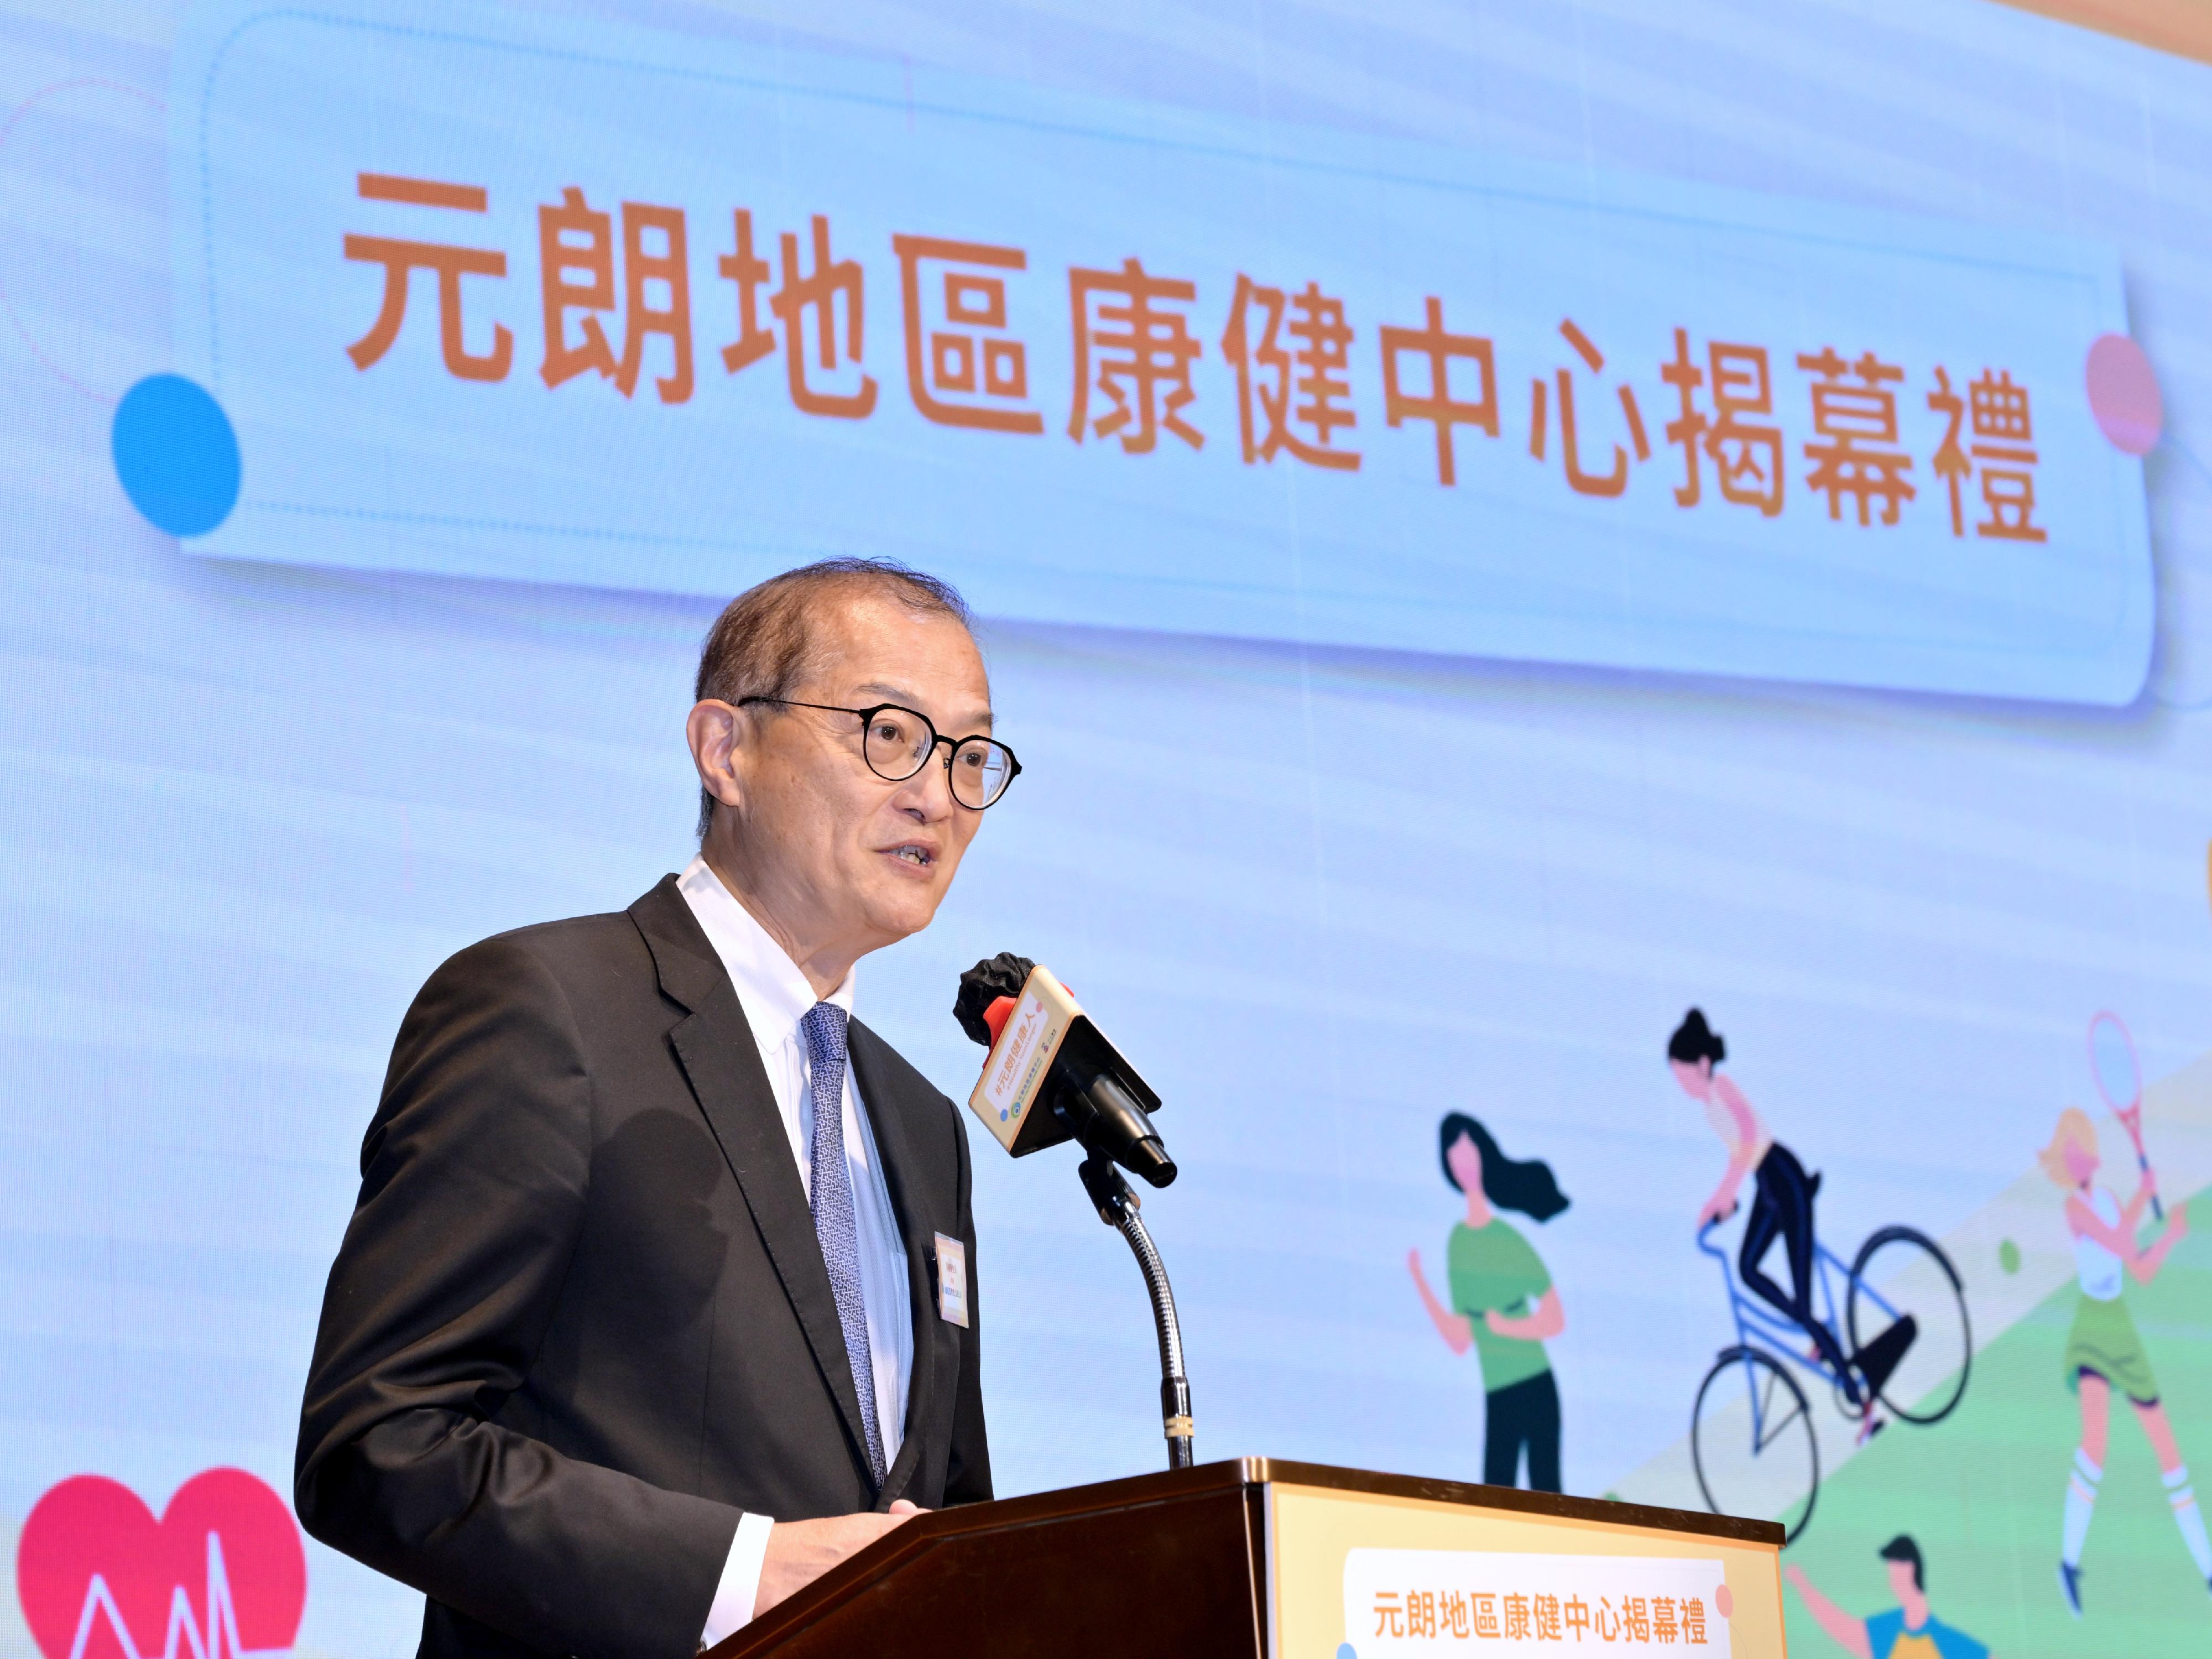 The Secretary for Health, Professor Lo Chung-mau, delivers a speech at the opening ceremony of the Yuen Long District Health Centre this morning (September 5).